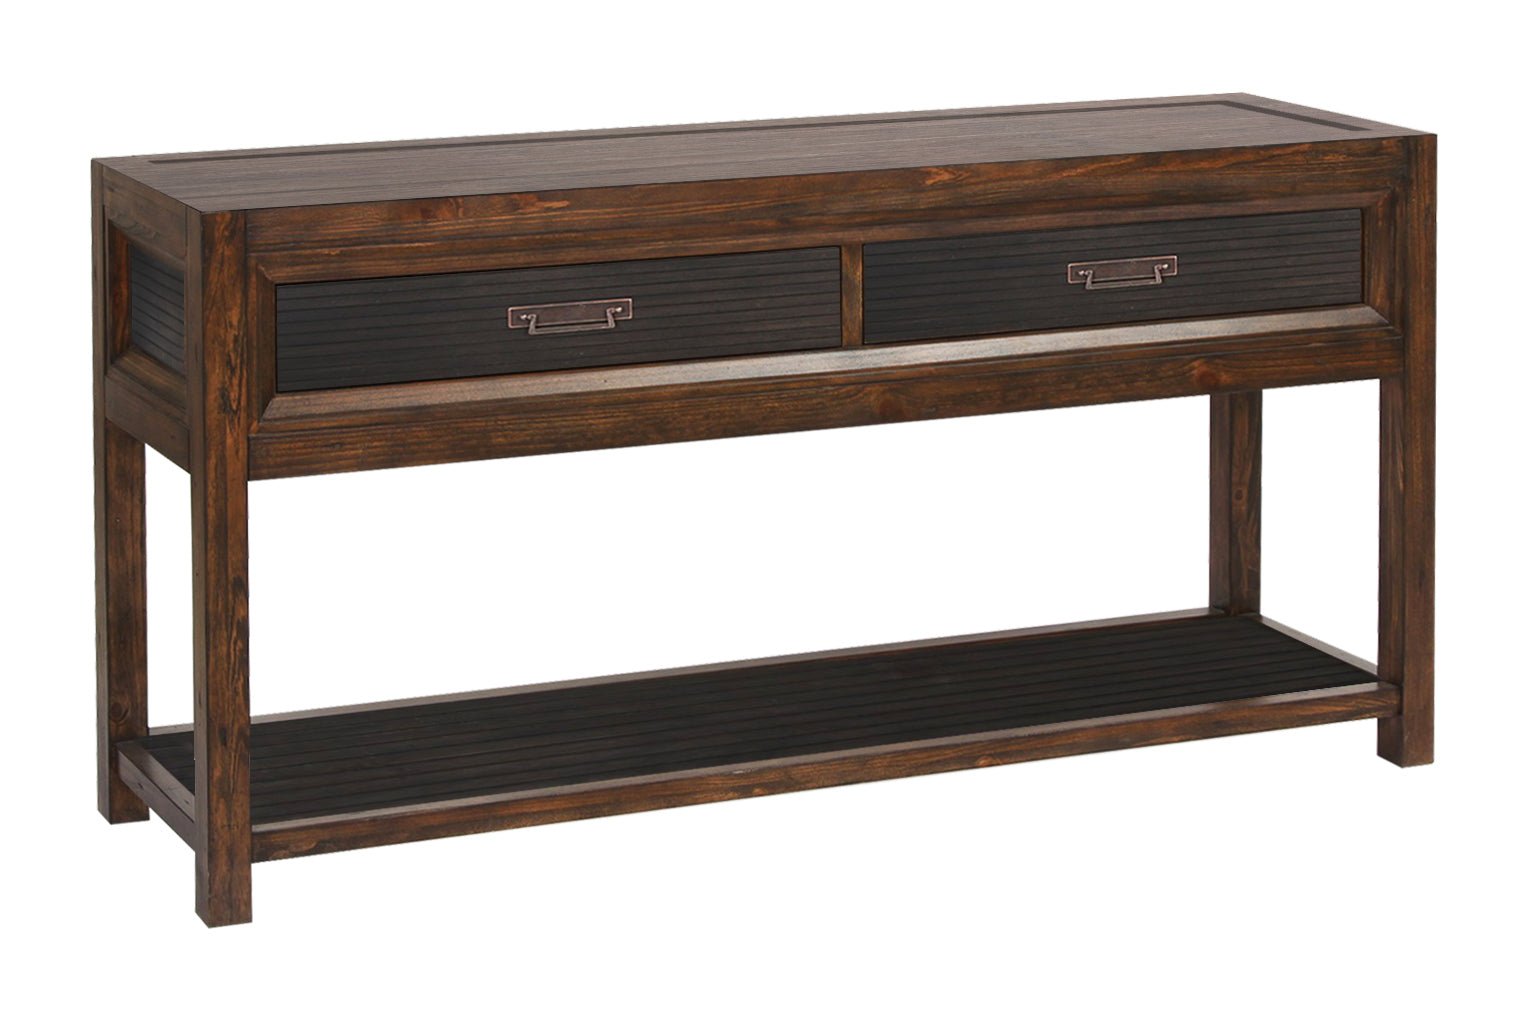 Bridgevine Home Branson 2-drawer Sofa Table, Two-Tone Finish - Tuesday Morning-Furniture | Tables | Accent Tables | Sofa Tables